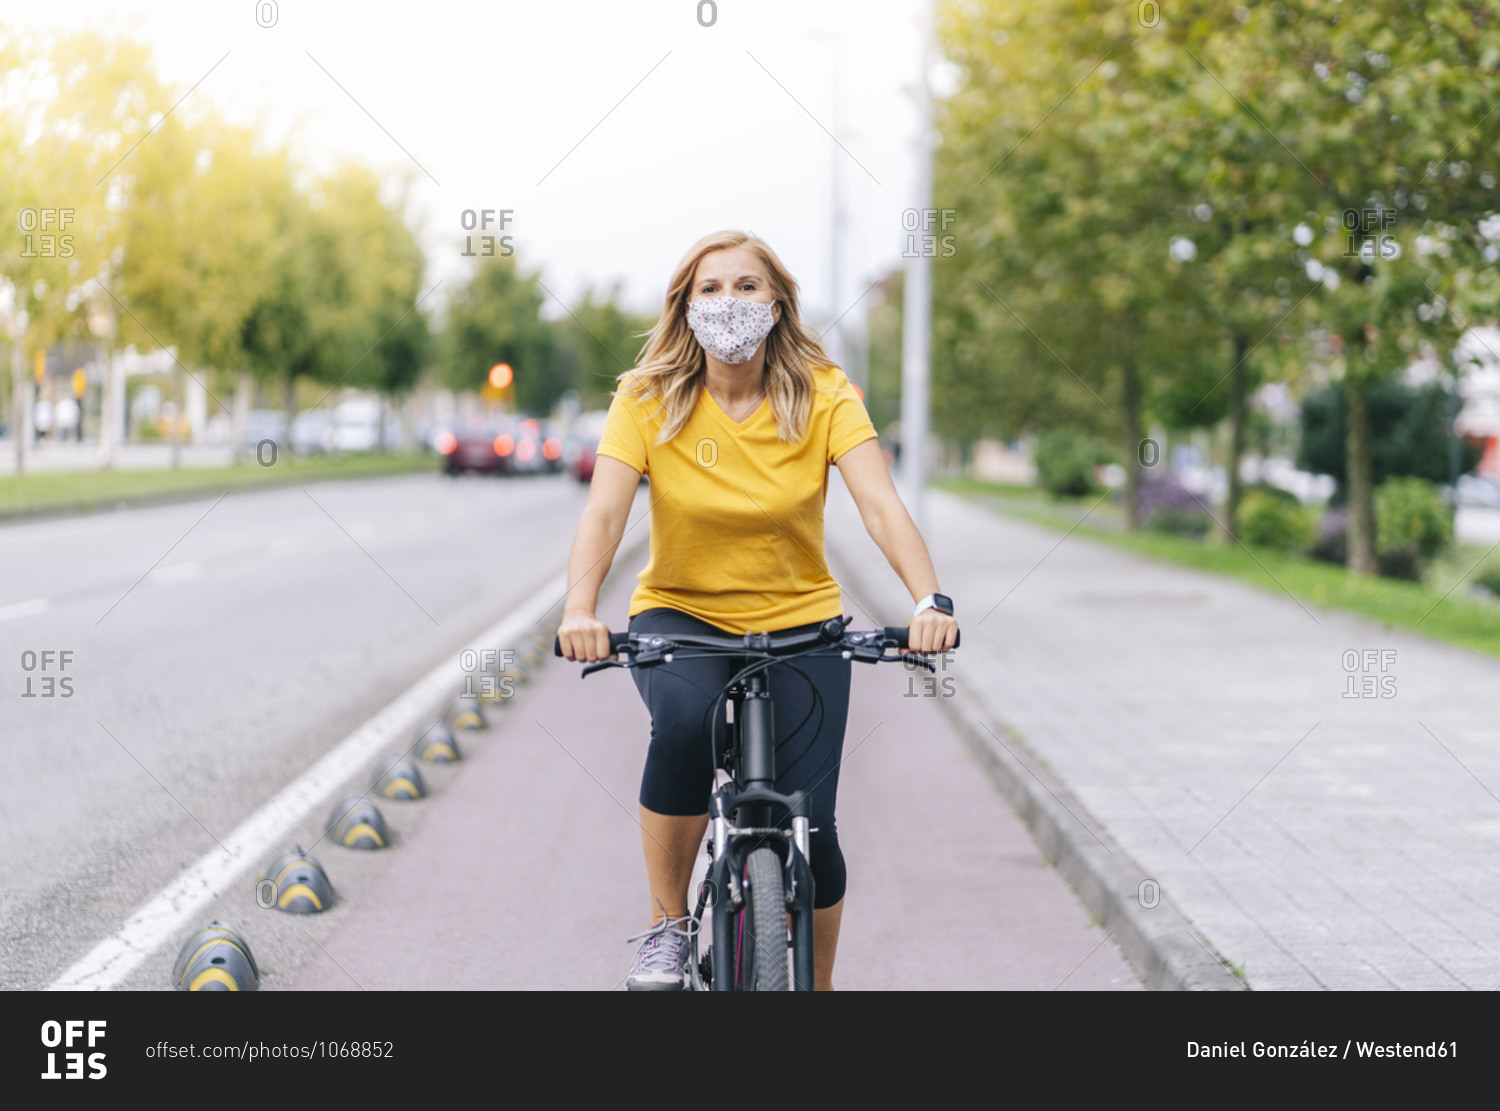 Woman wearing protective face mask cycling on bicycle lane in city